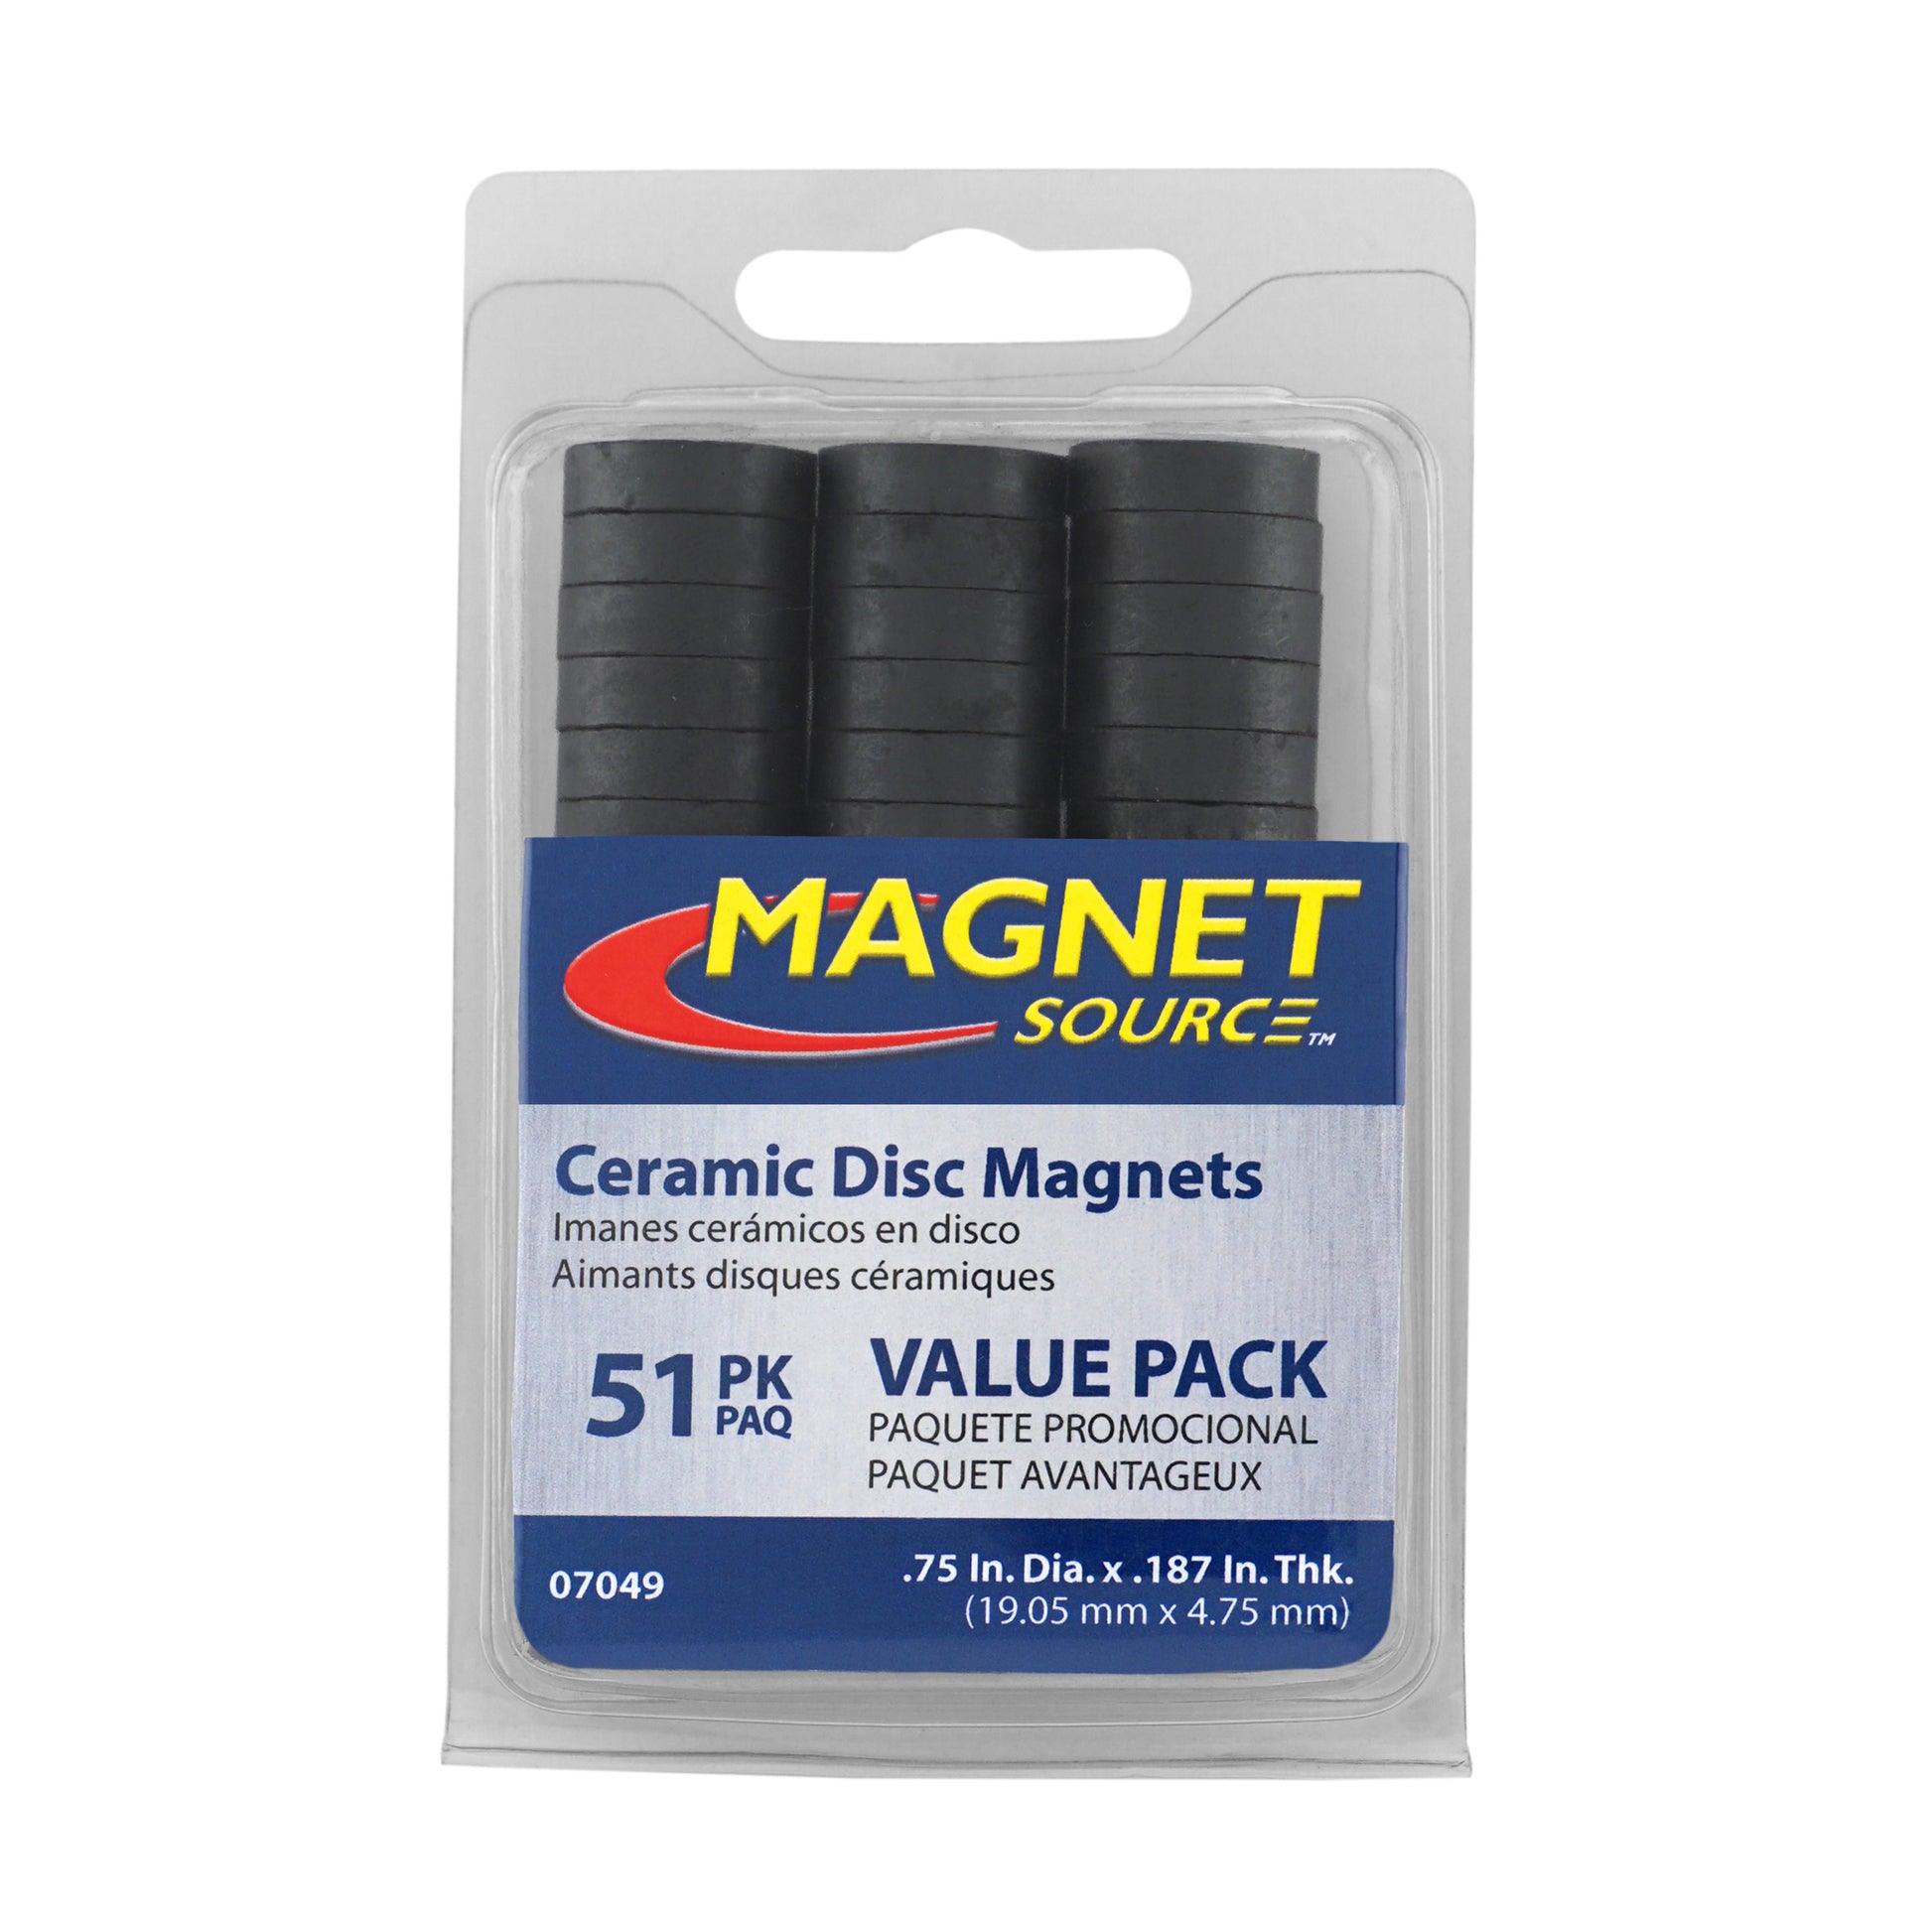 Load image into Gallery viewer, 07049 Ceramic Disc Magnets (51pk) - Side View